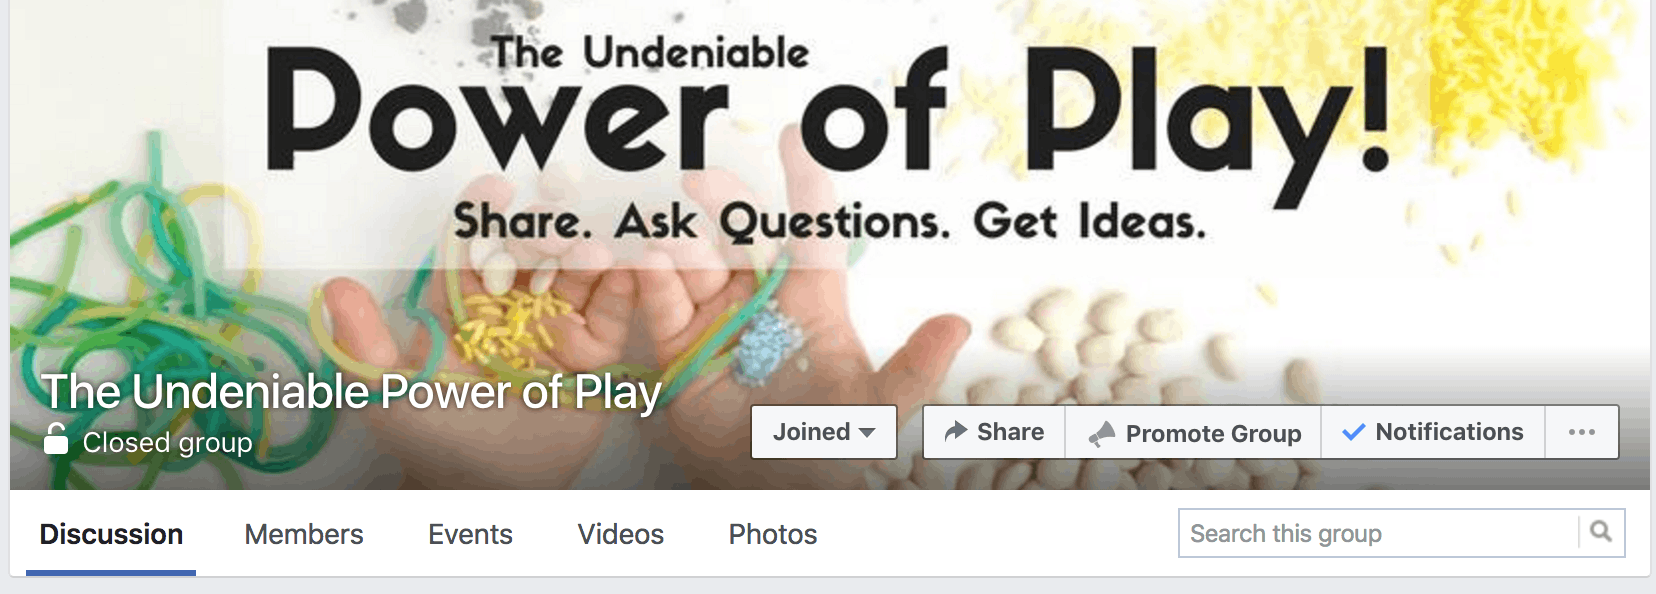 Join the play-based learning instachallenge #PowerofPlay52 on Instagram. Great for early childhood educational ideas, teachers, parents, preschoolers and toddlers